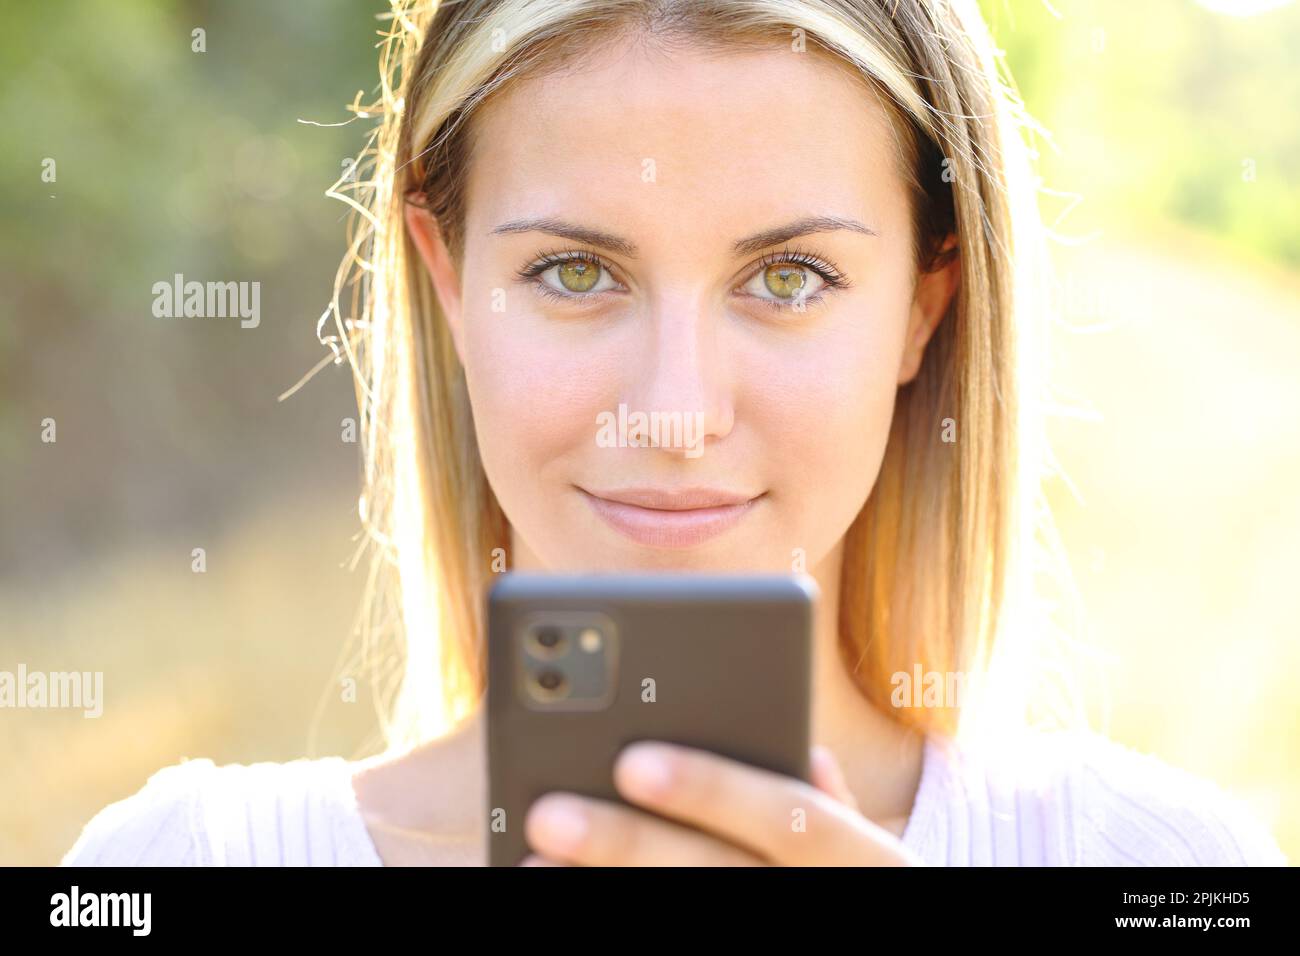 Front view portrait of a beautiful woman holding phone looking at camera outdoors Stock Photo